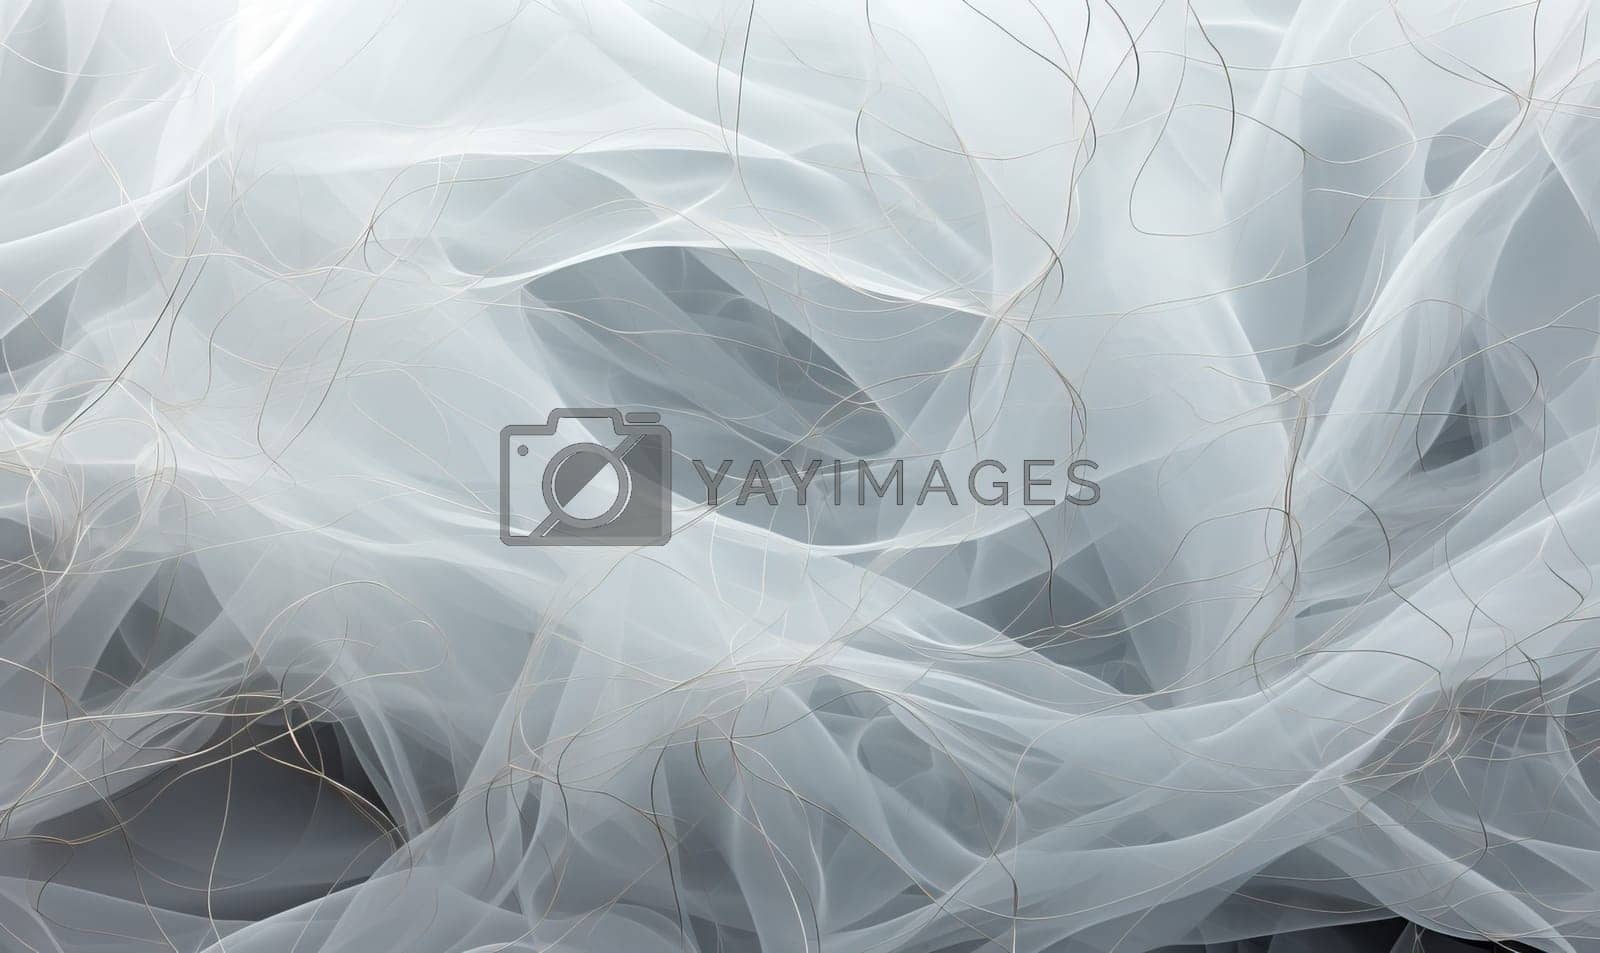 Royalty free image of White abstract creative exuberant and refined texture background by Fischeron